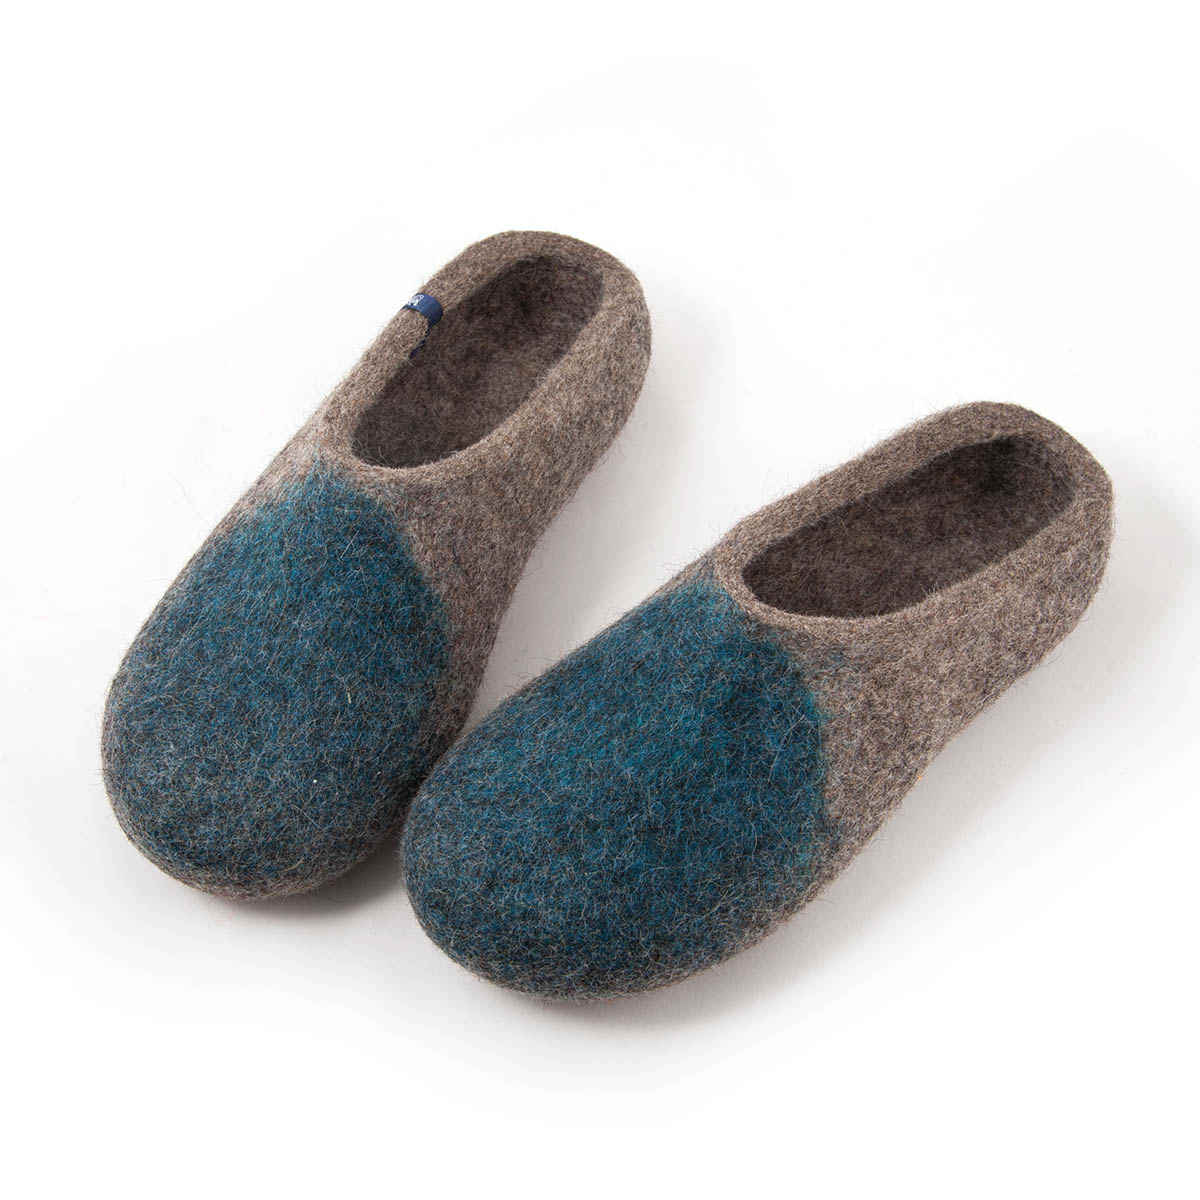 SOLO slip on slippers - felted slippers for men | Wooppers